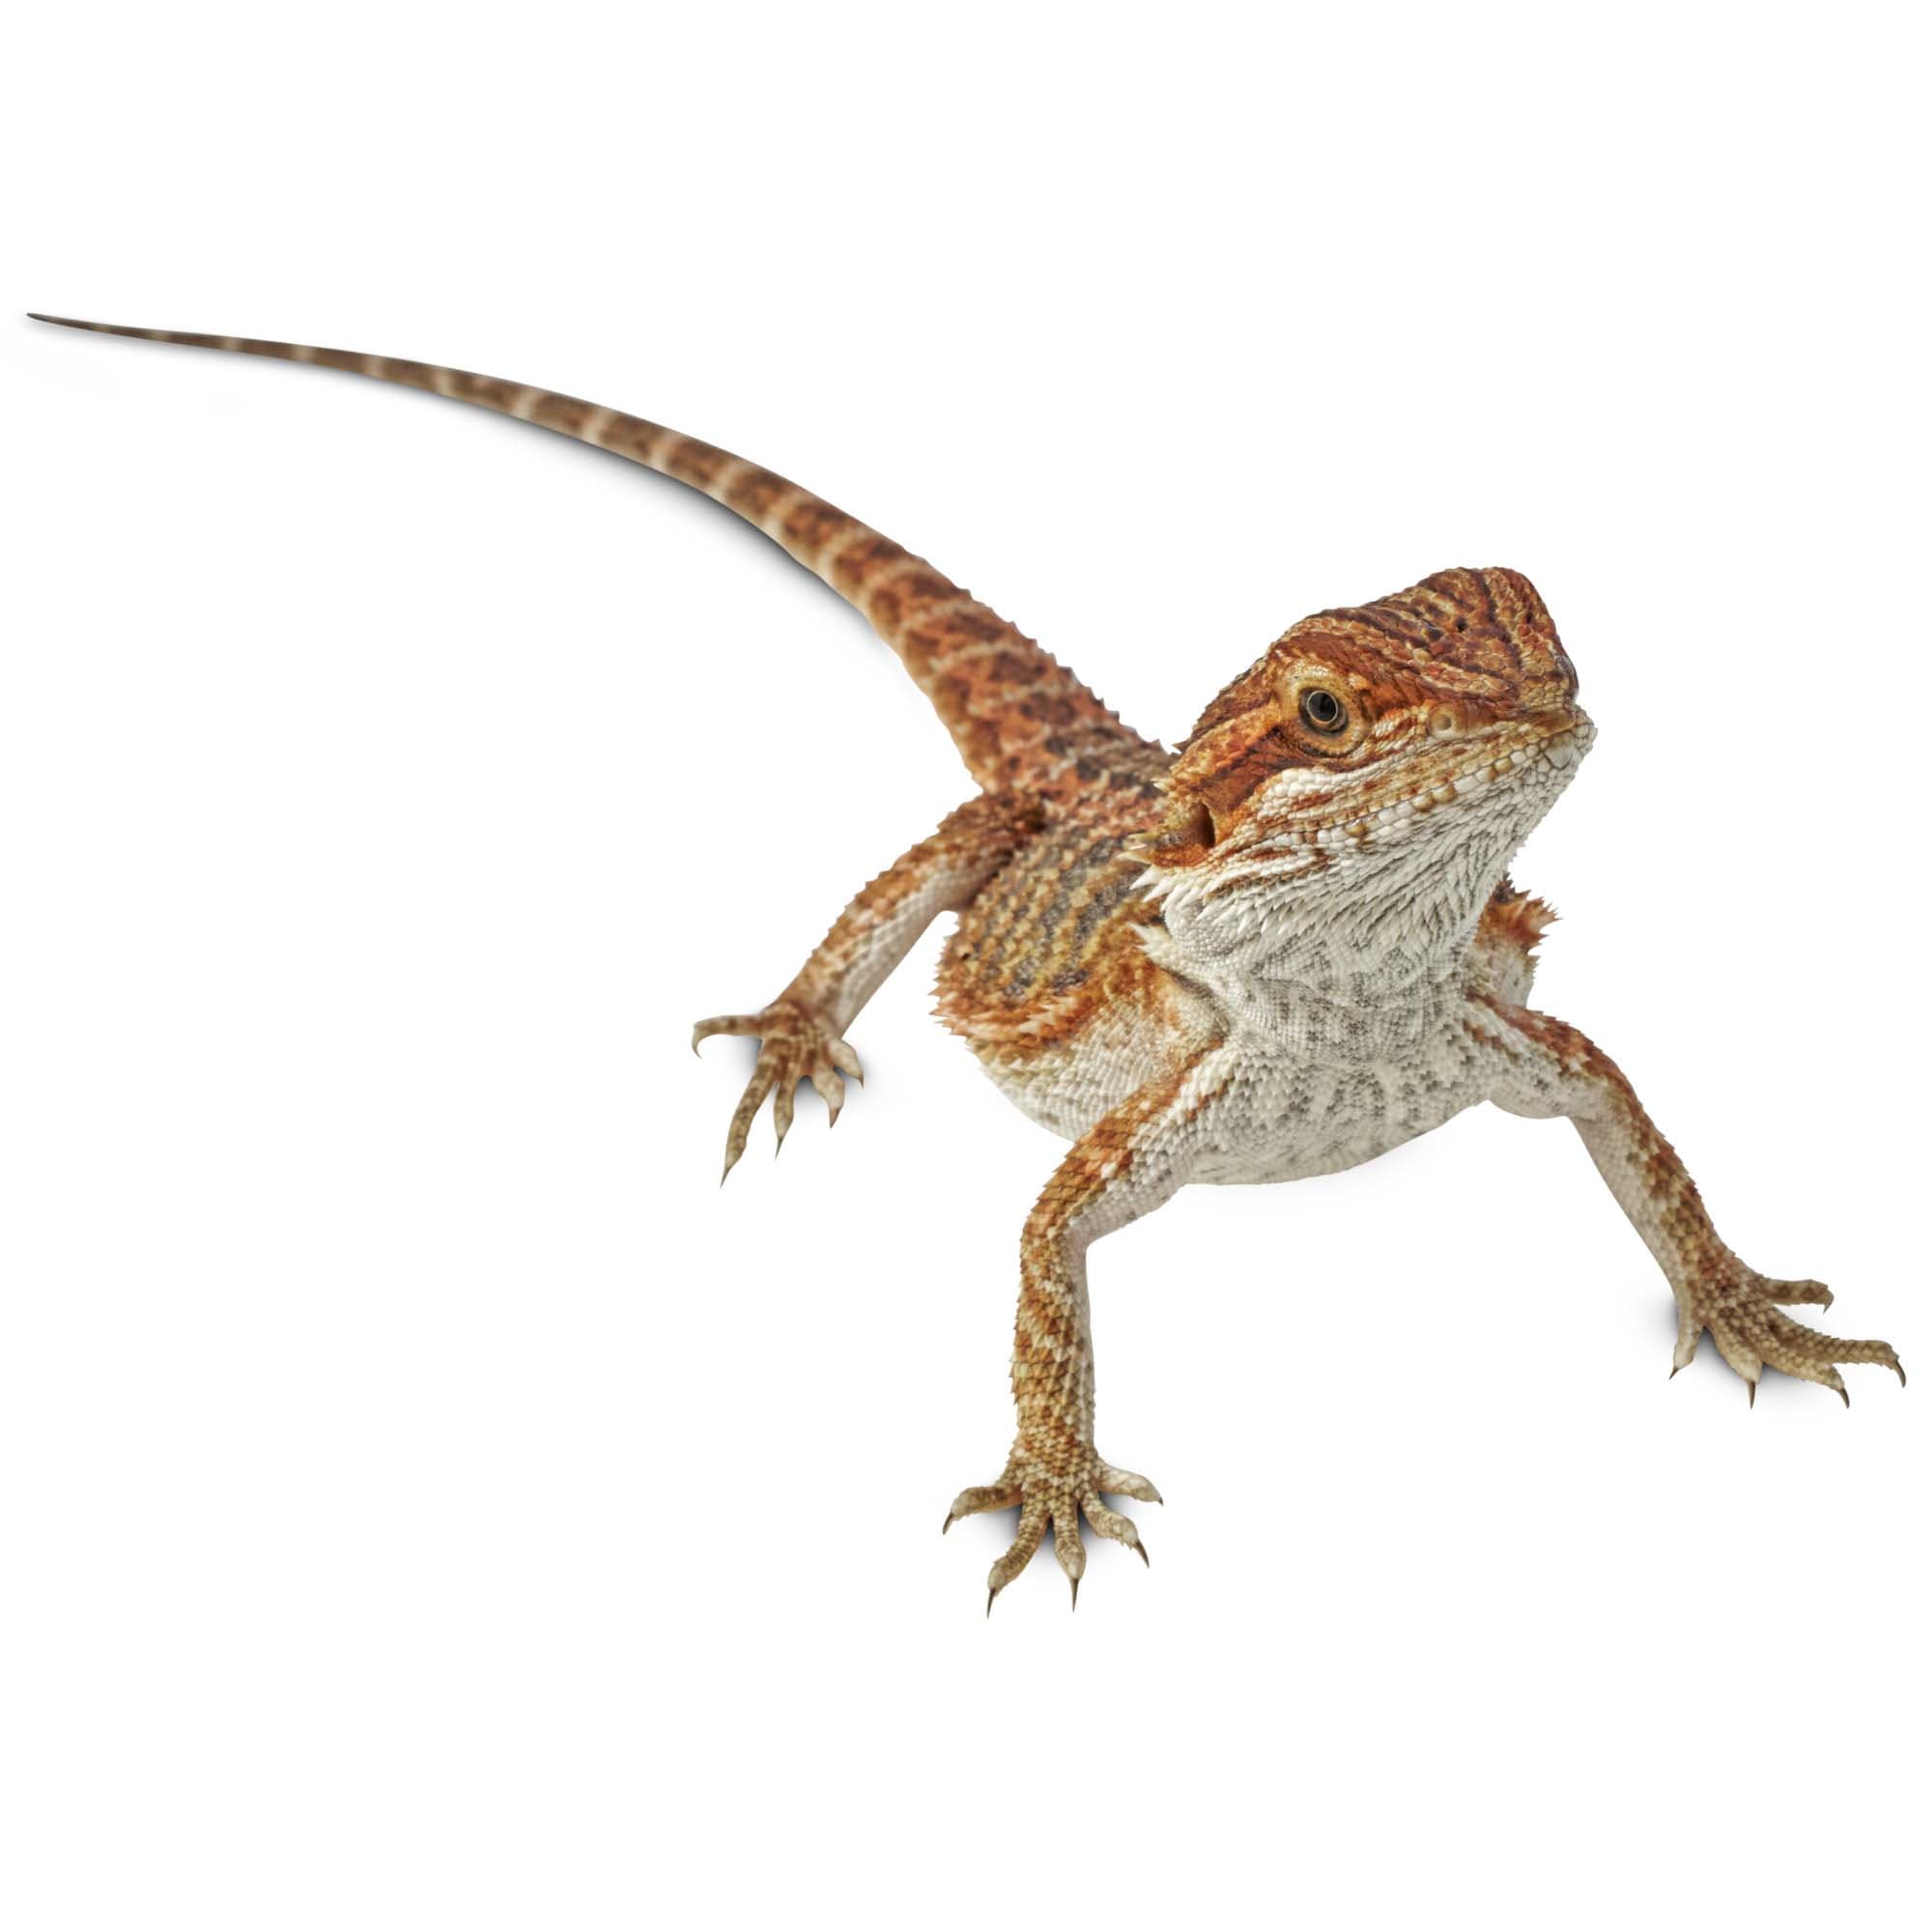 Buy Live Bearded Dragons For Sale Petco,Transplanting Yucca